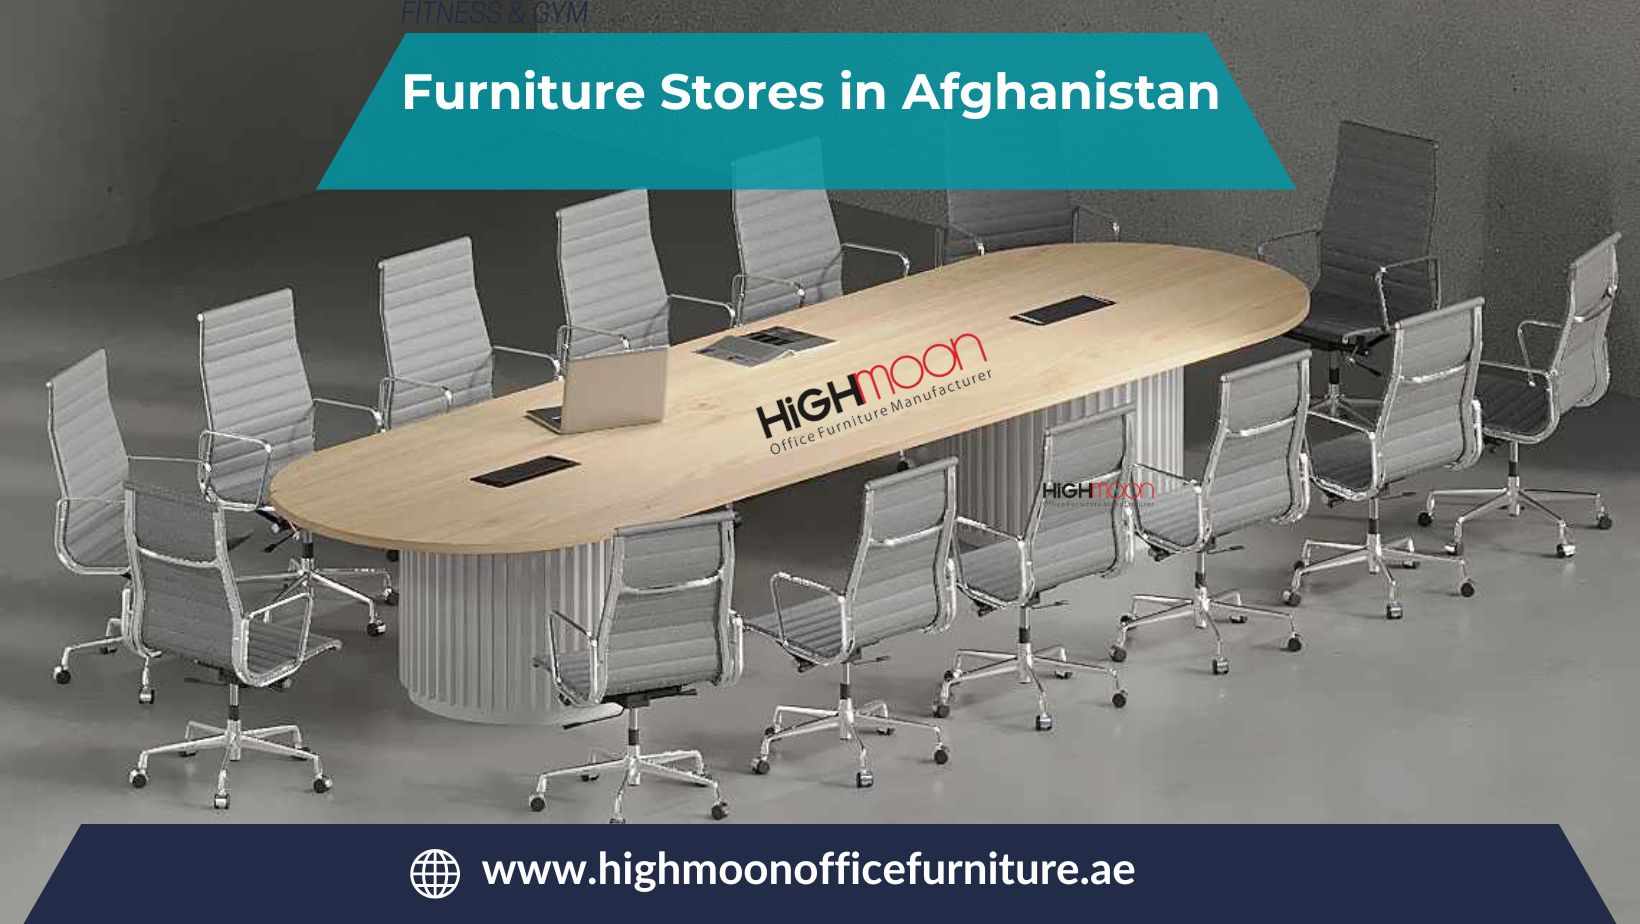 Furniture Stores in Afghanistan